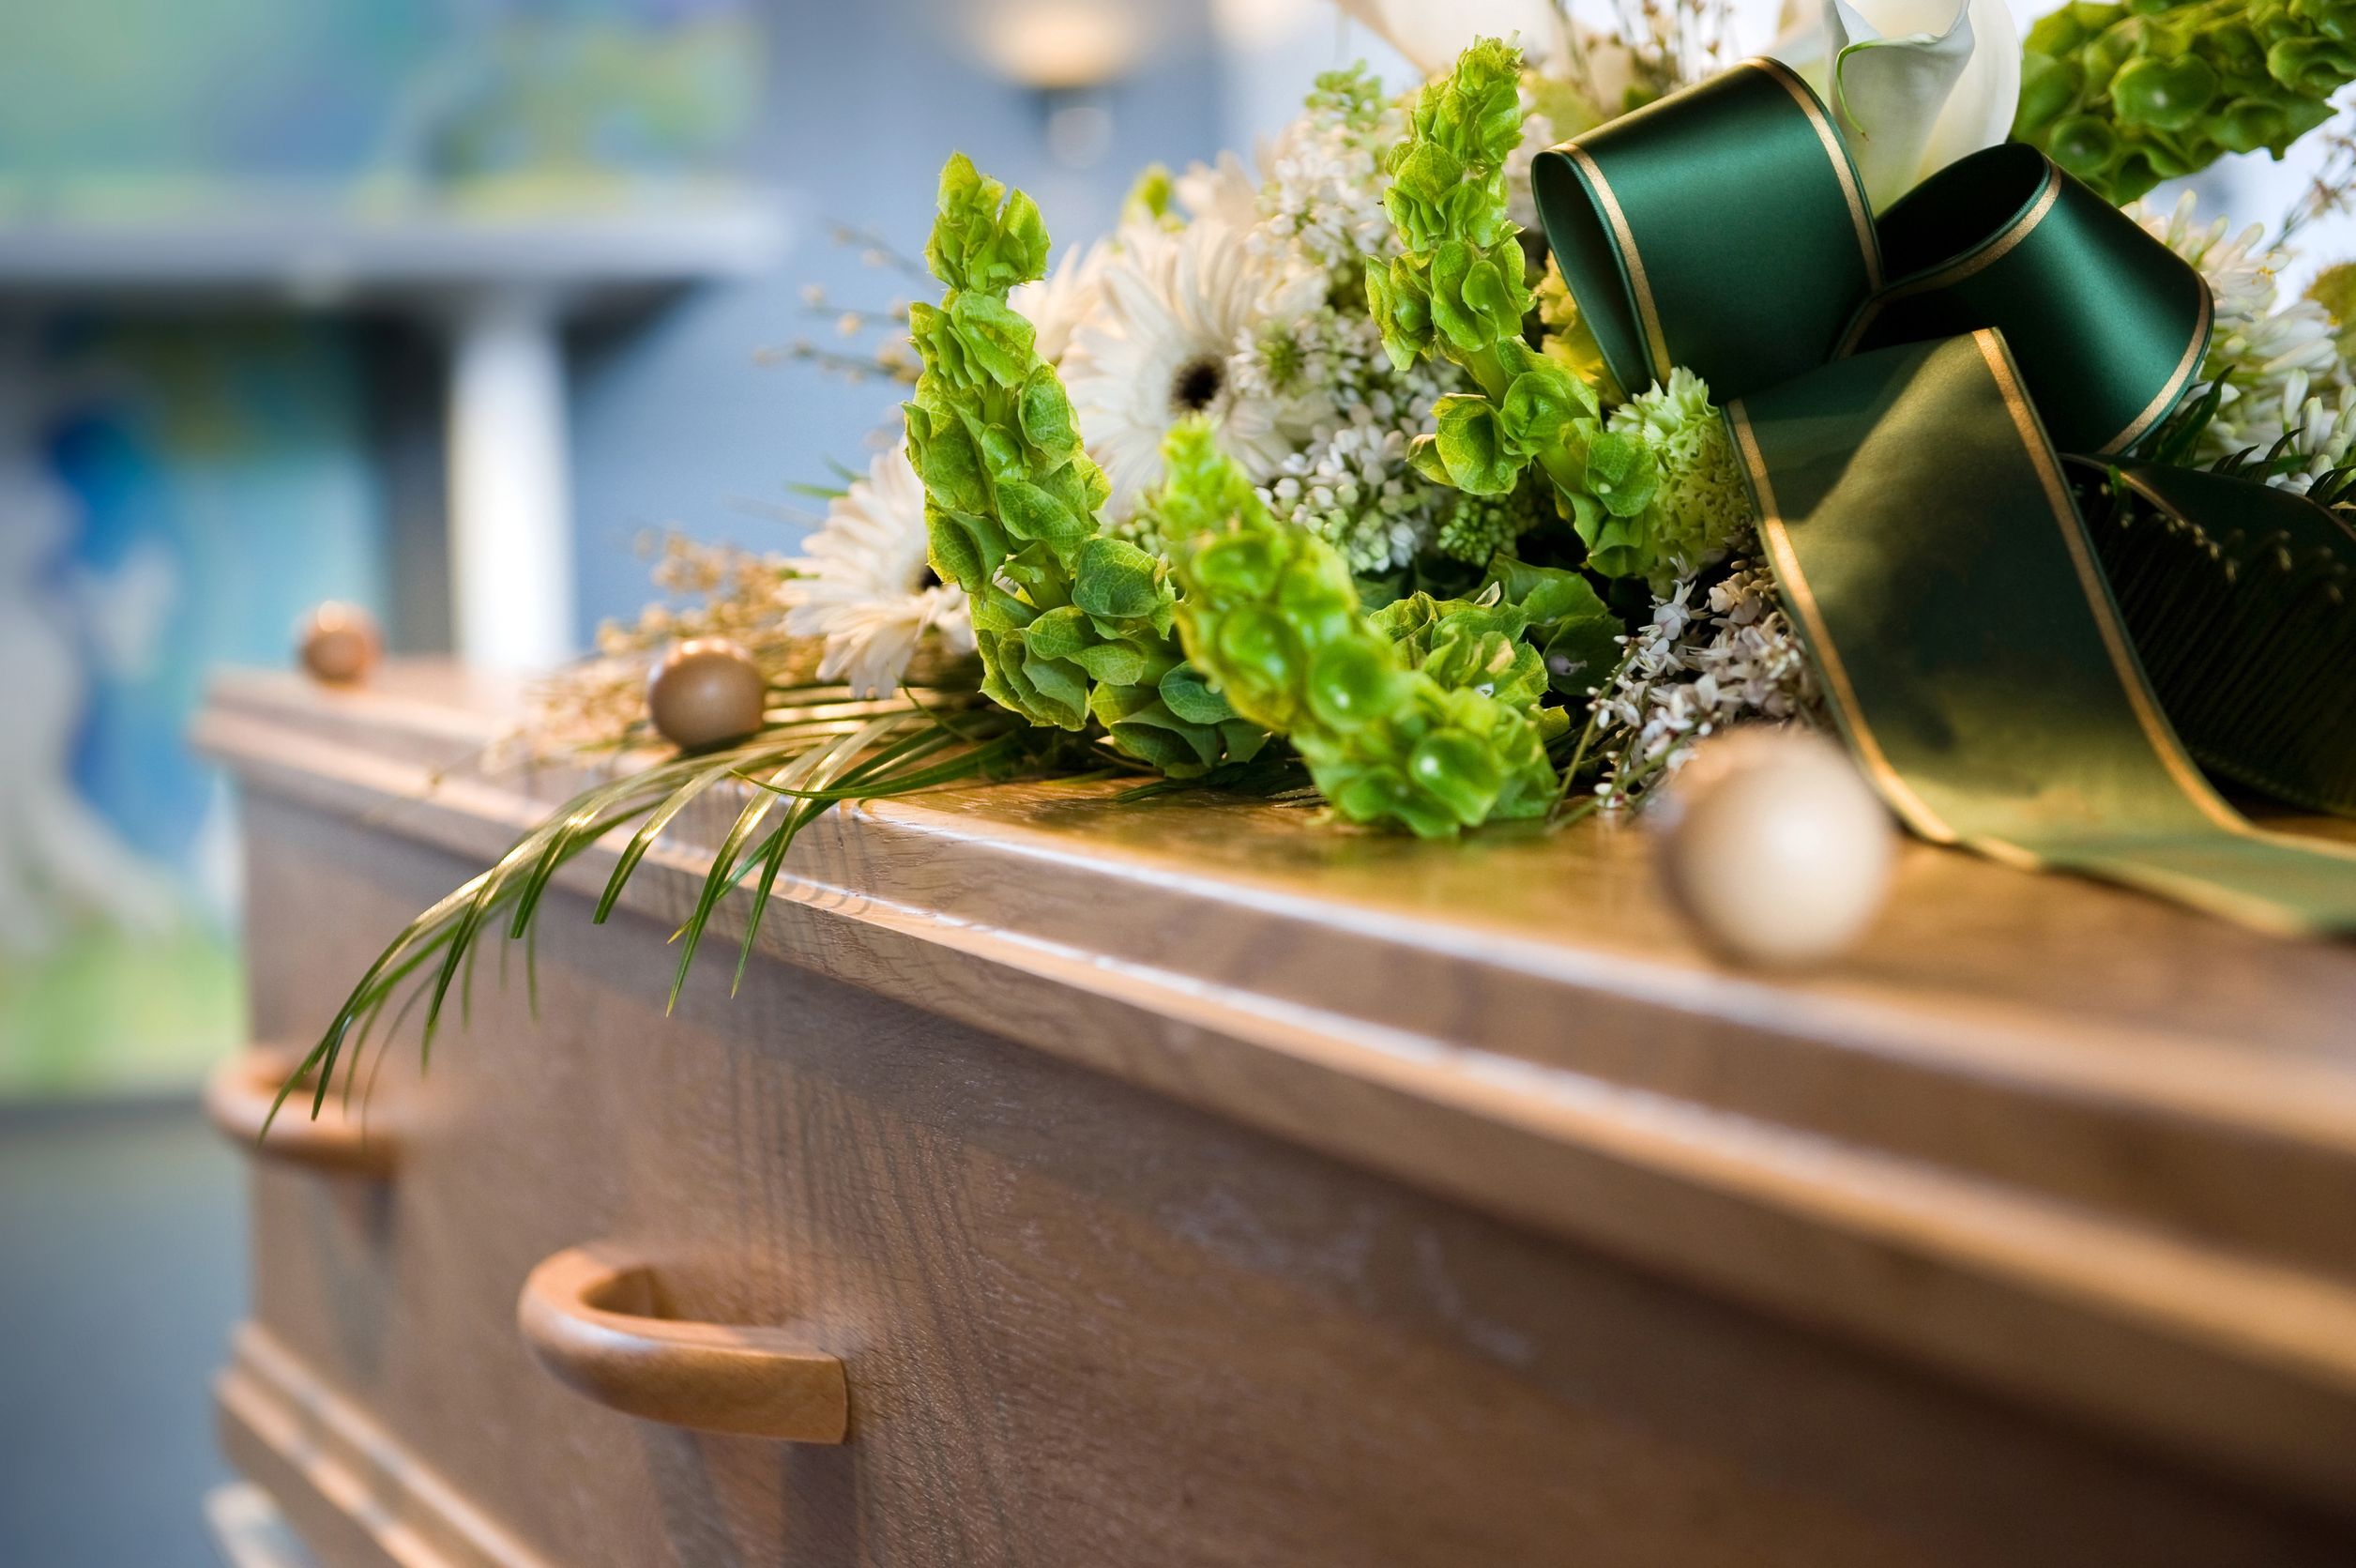 Too many options? These 5 suggestions will help you pick out an appropriate casket